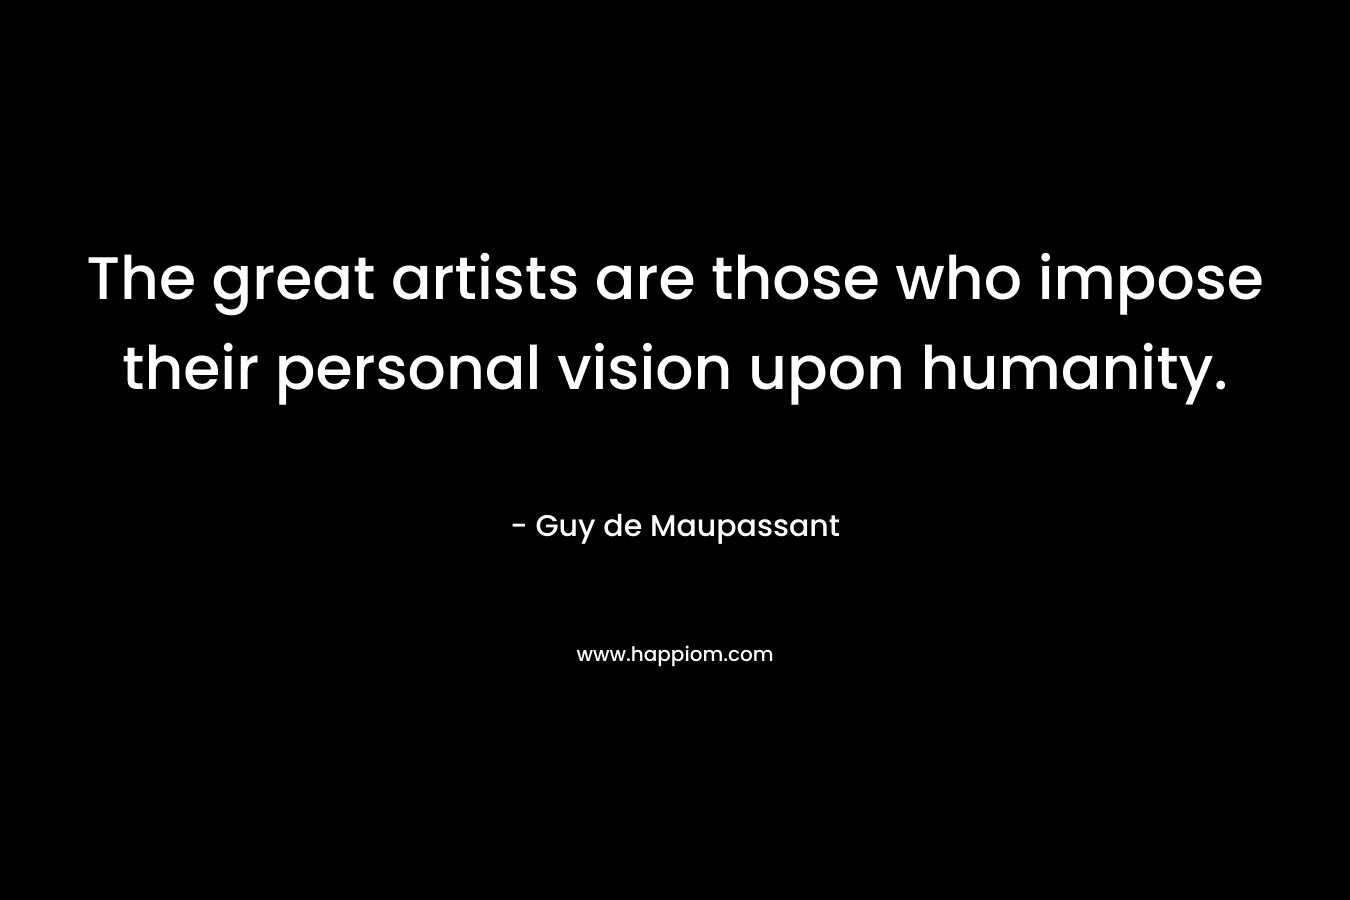 The great artists are those who impose their personal vision upon humanity. – Guy de Maupassant